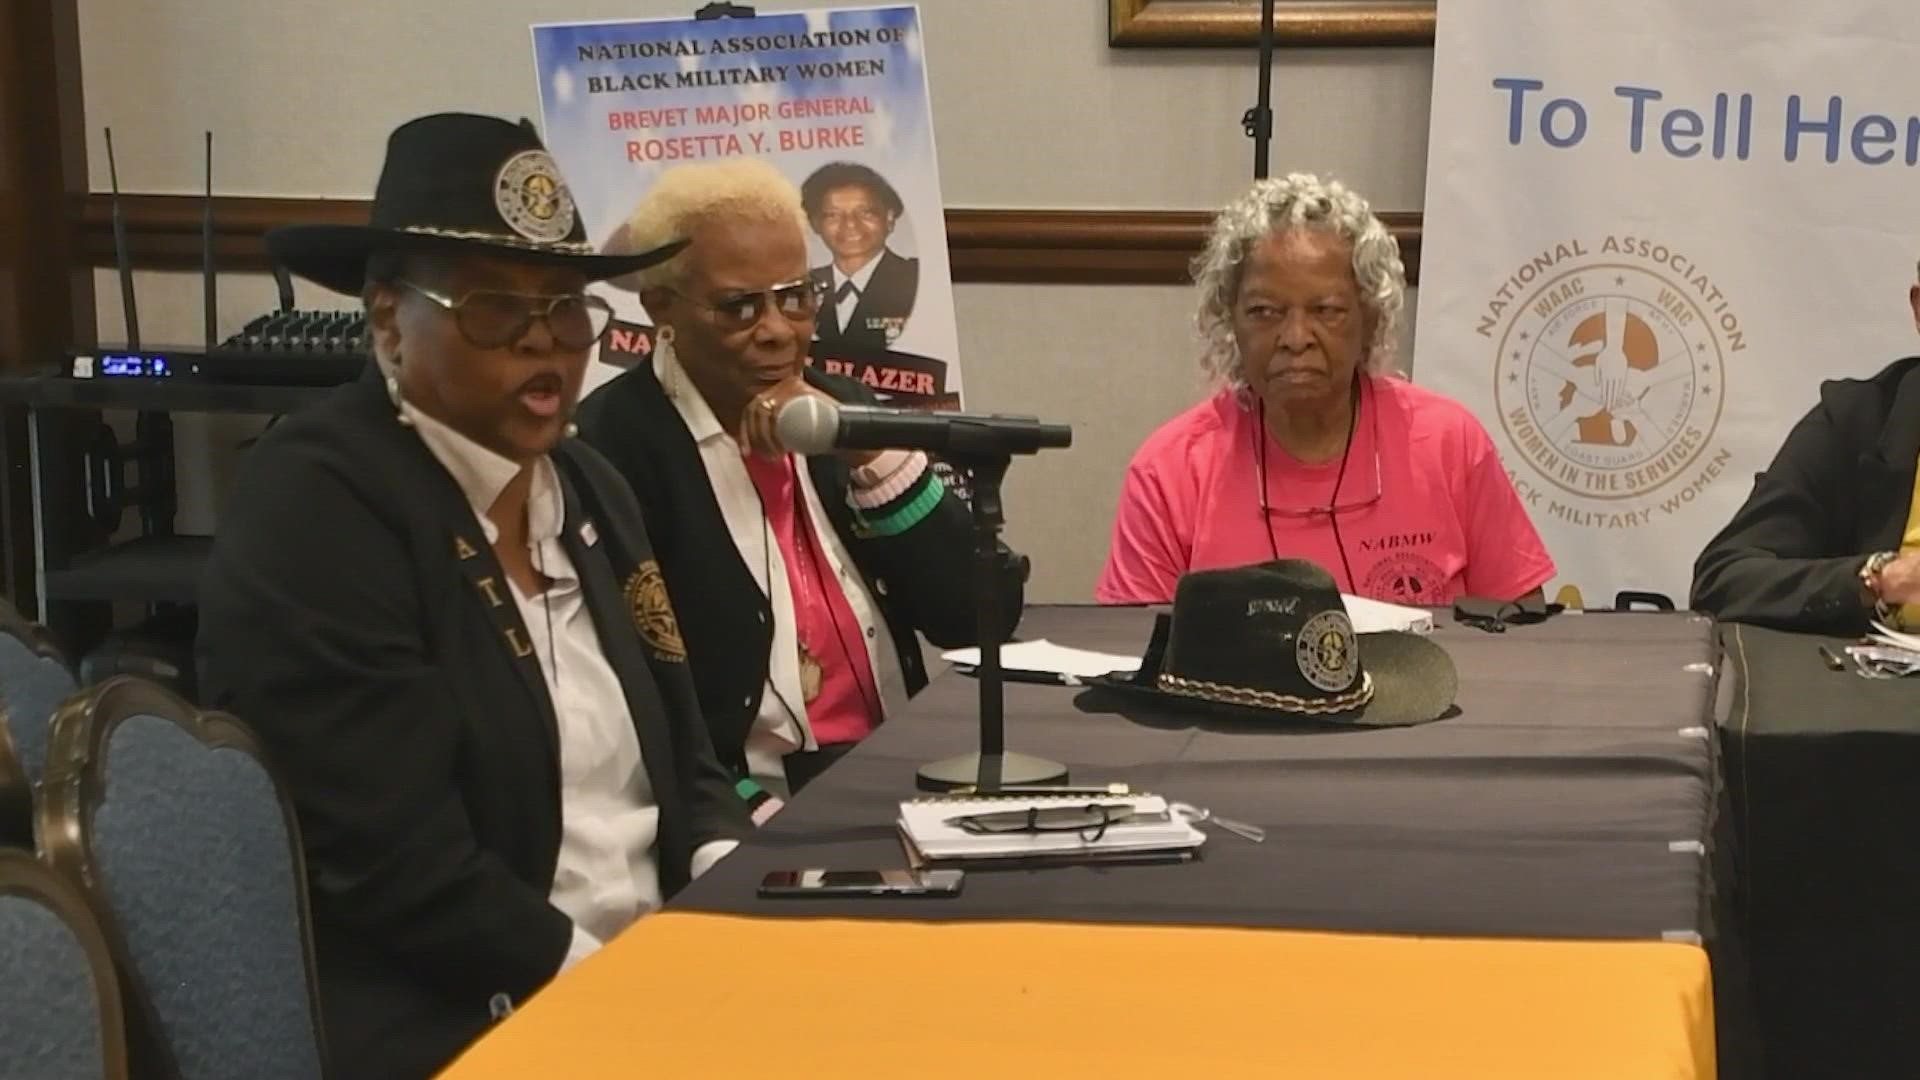 San Antonio is hosting the National Association of Black Military Women this weekend.